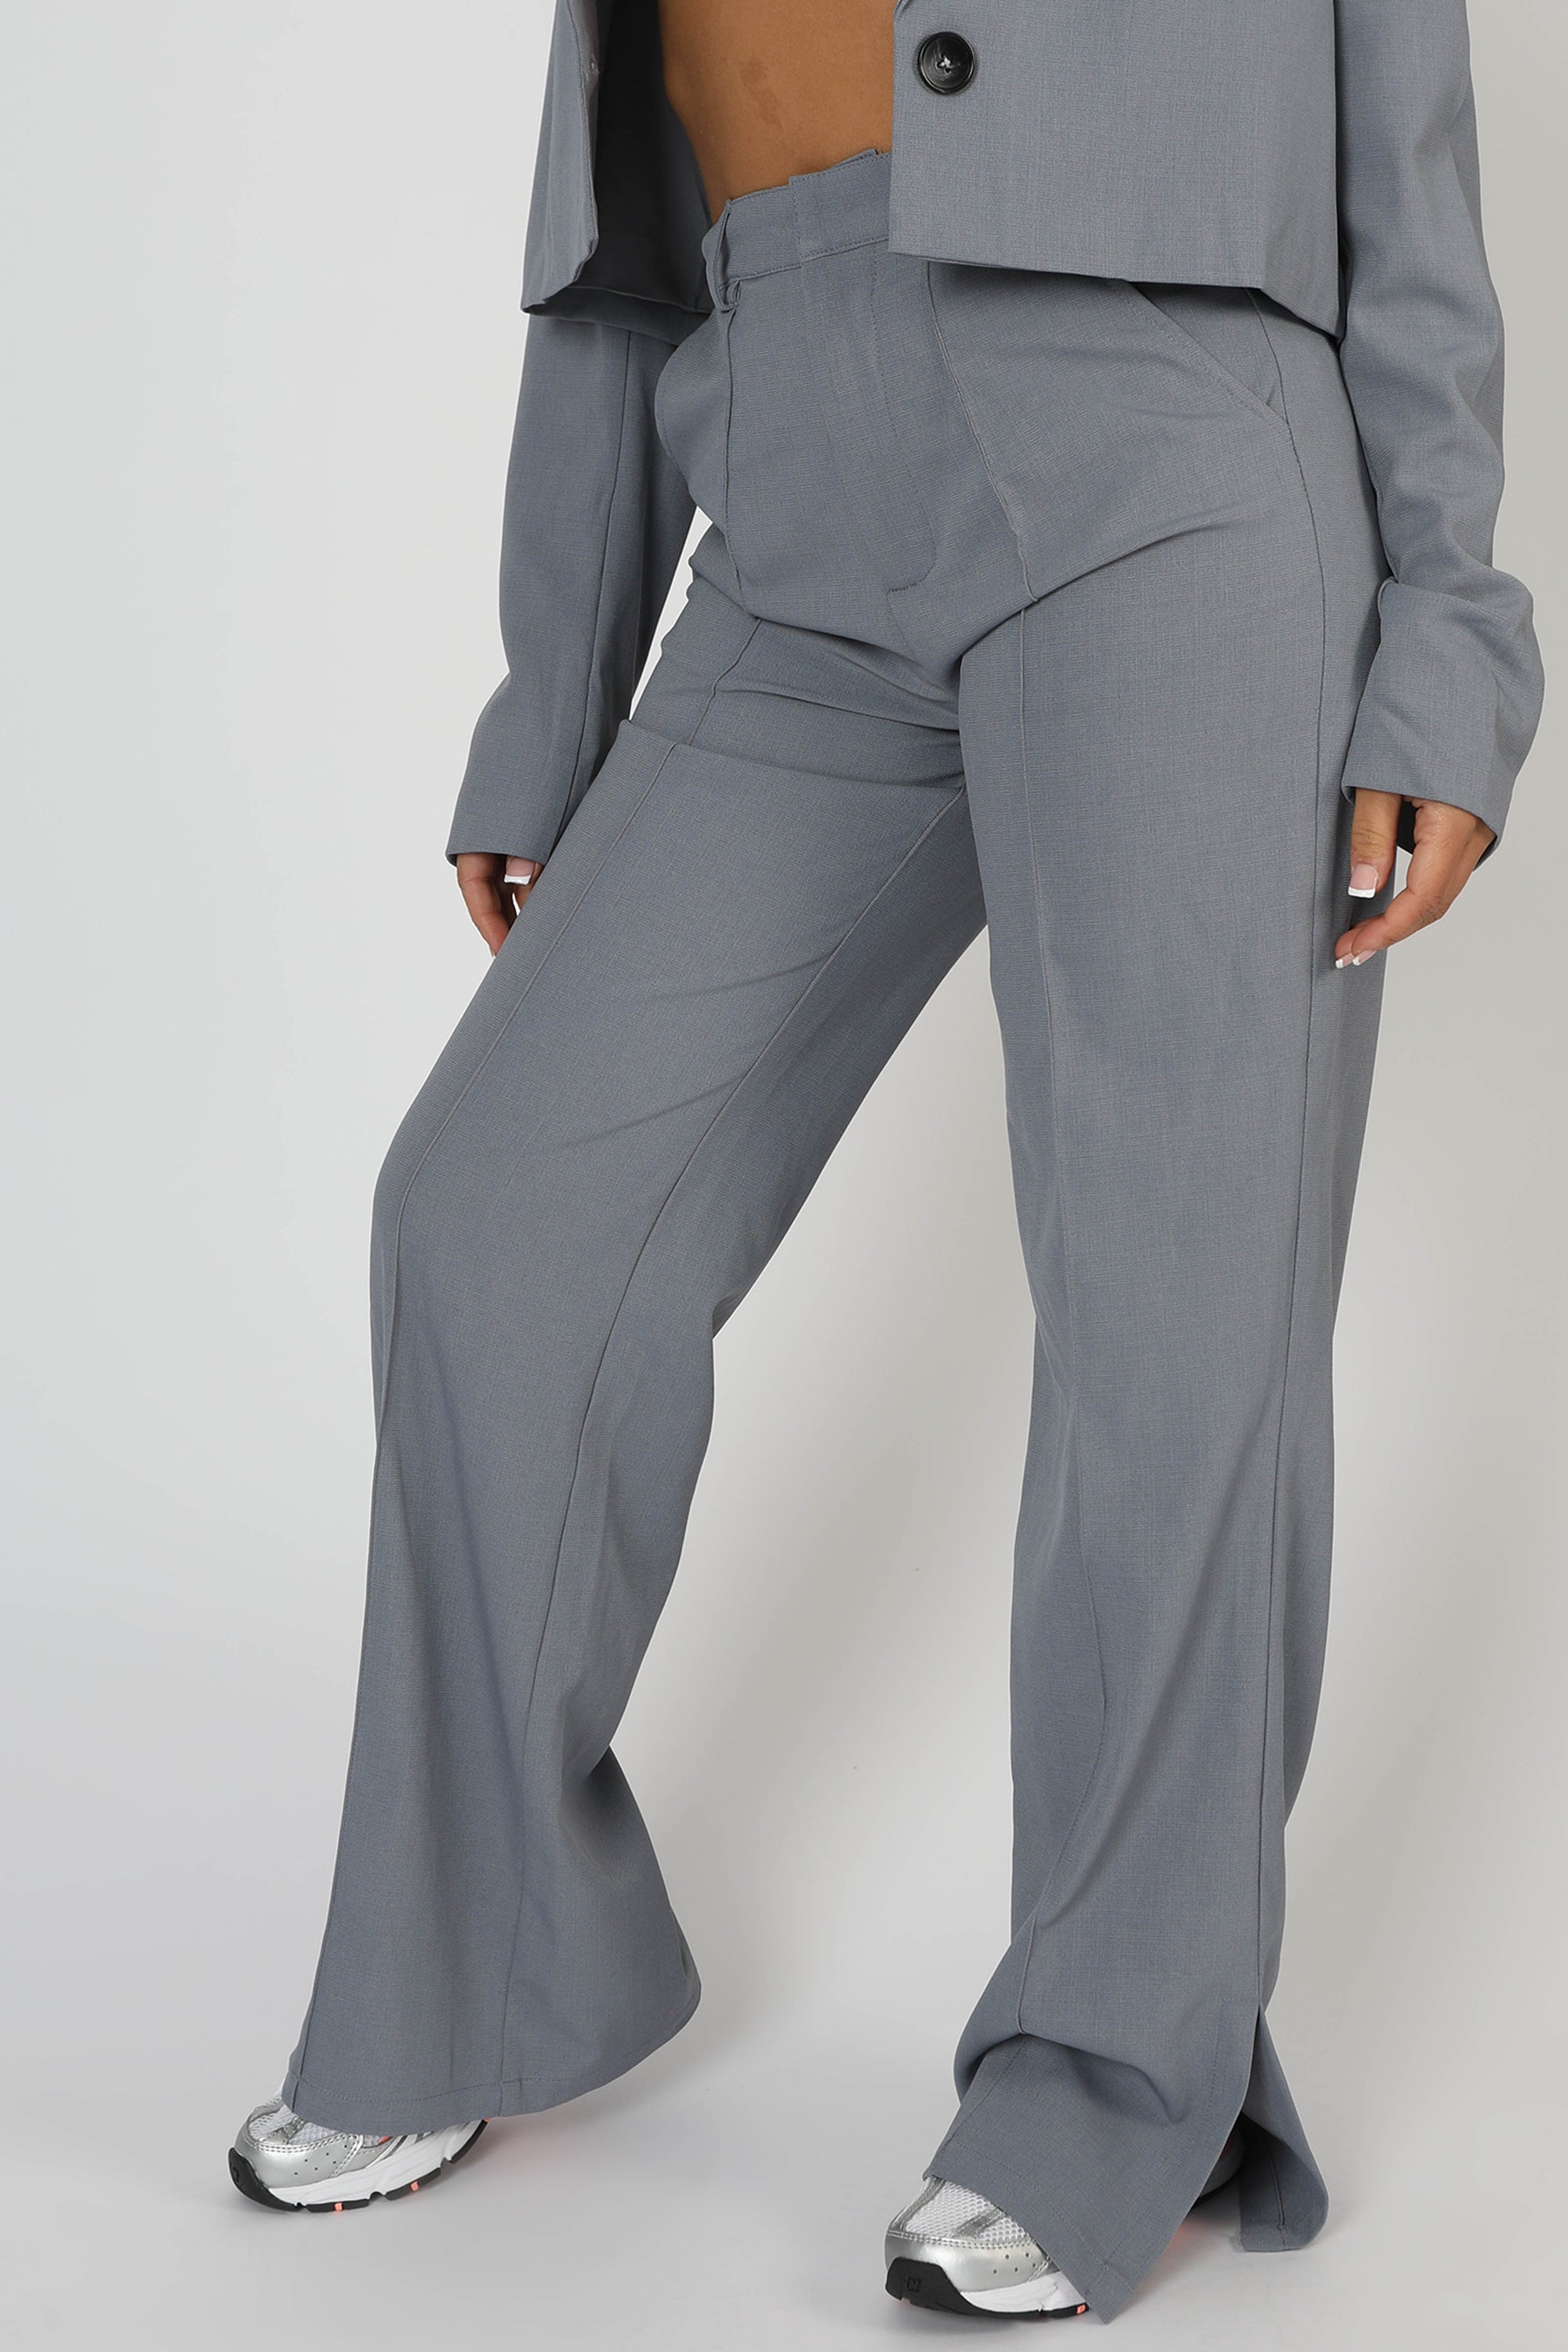 SEAM DETAIL RELAXED TROUSER GREY